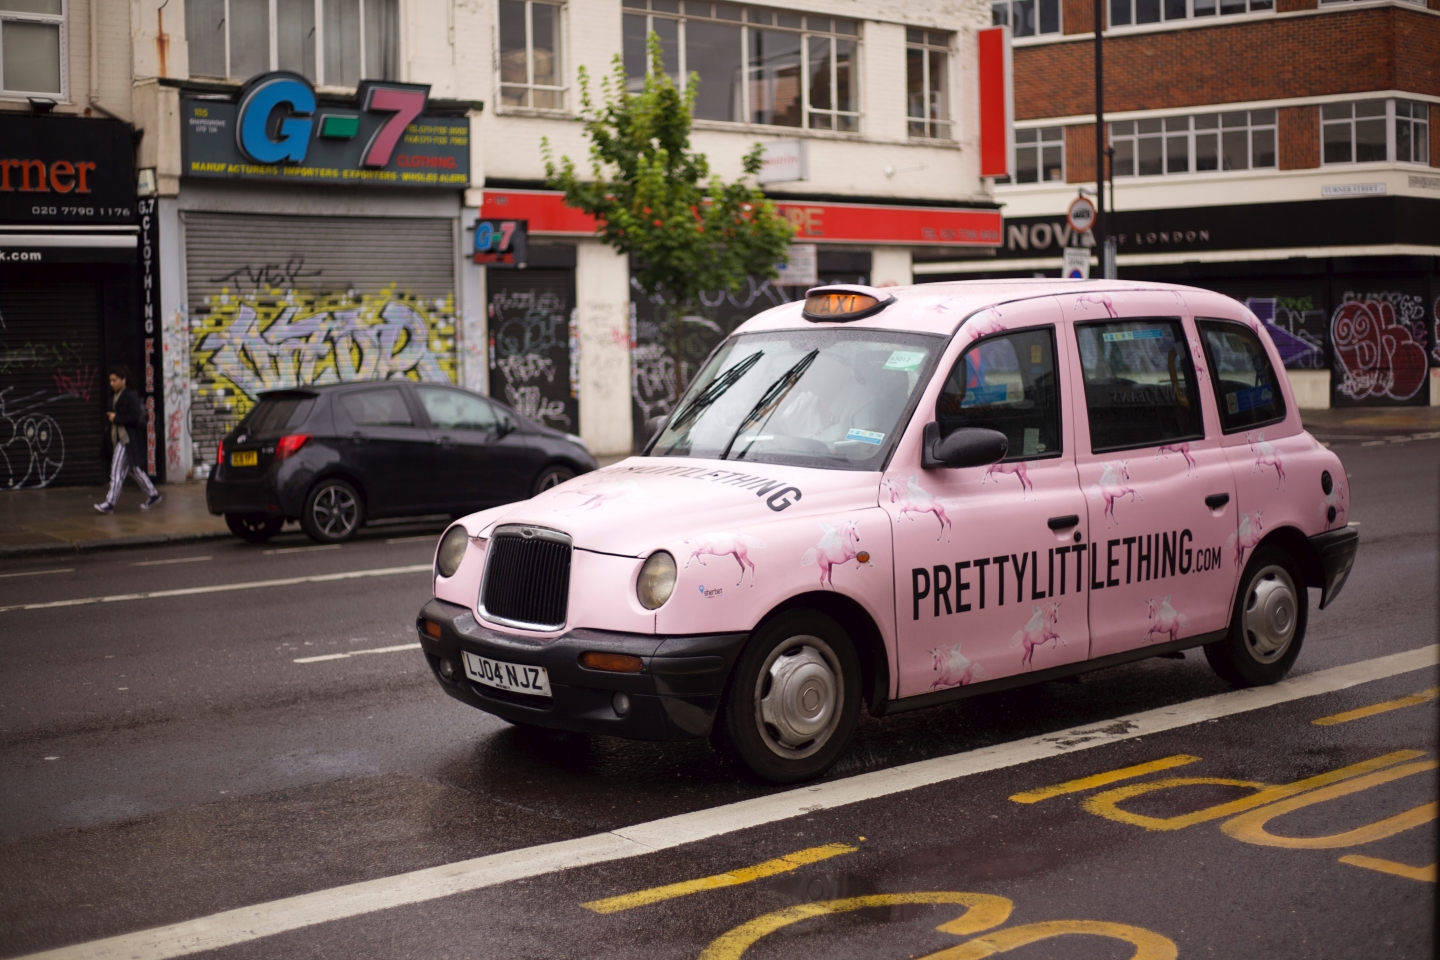 Number plate on pink London cab